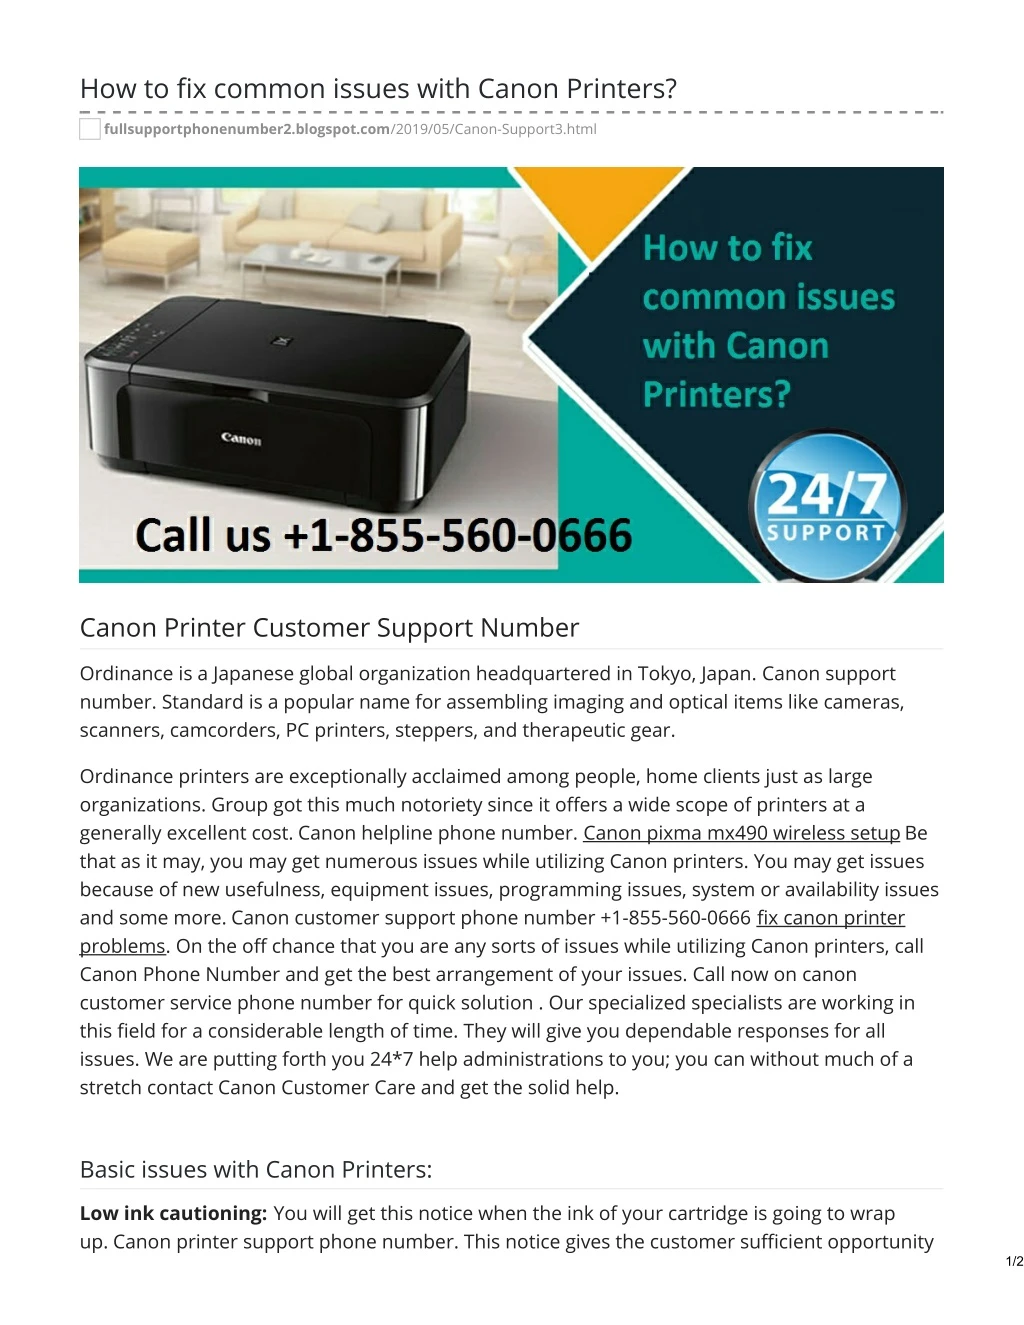 how to fix common issues with canon printers